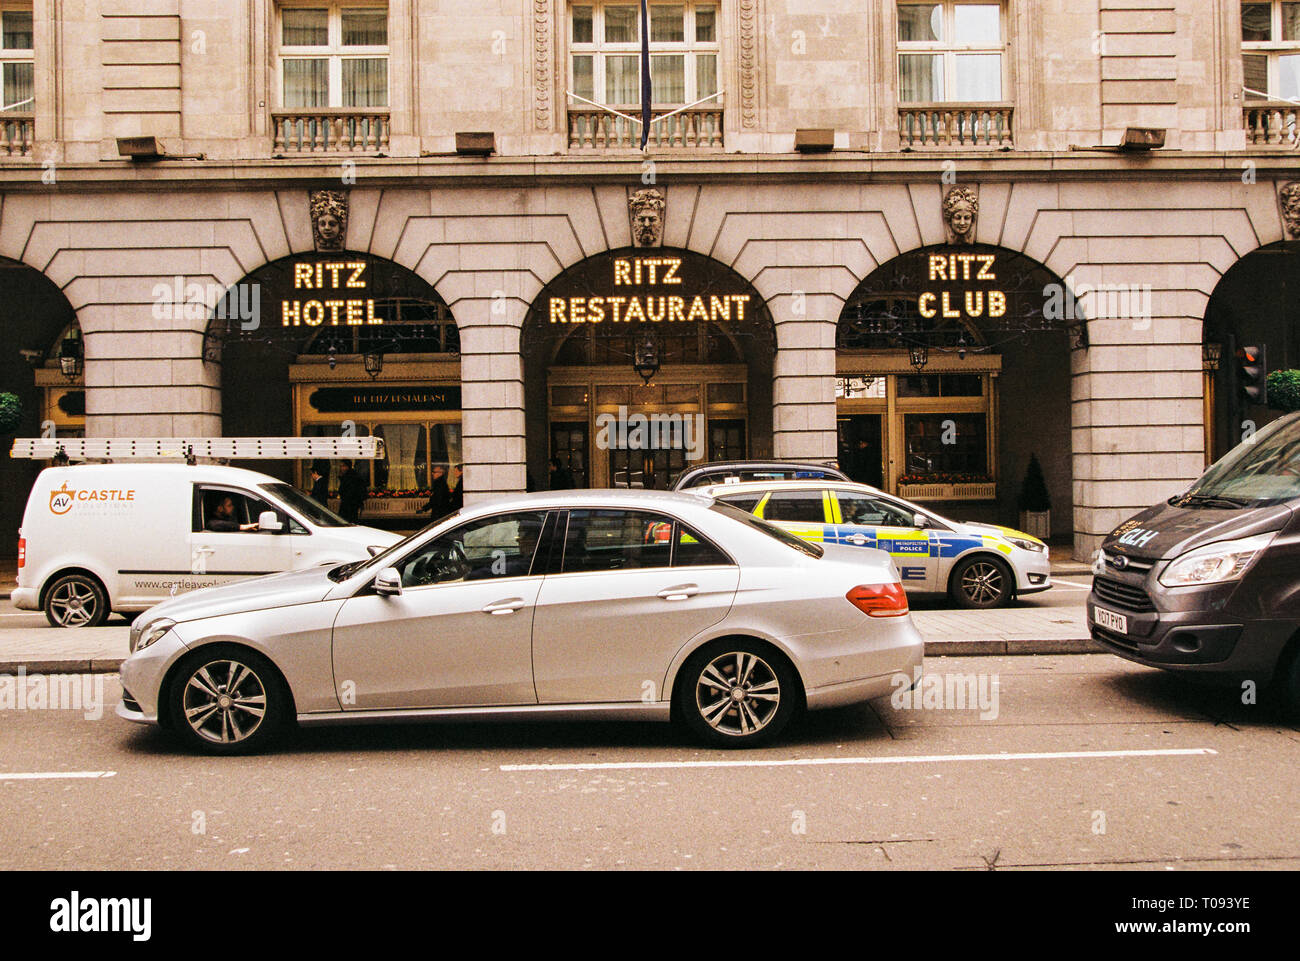 The Ritz Hotel and restaurant,150 Piccadilly, St. James's in London, England, United Kingdom, Europe Stock Photo